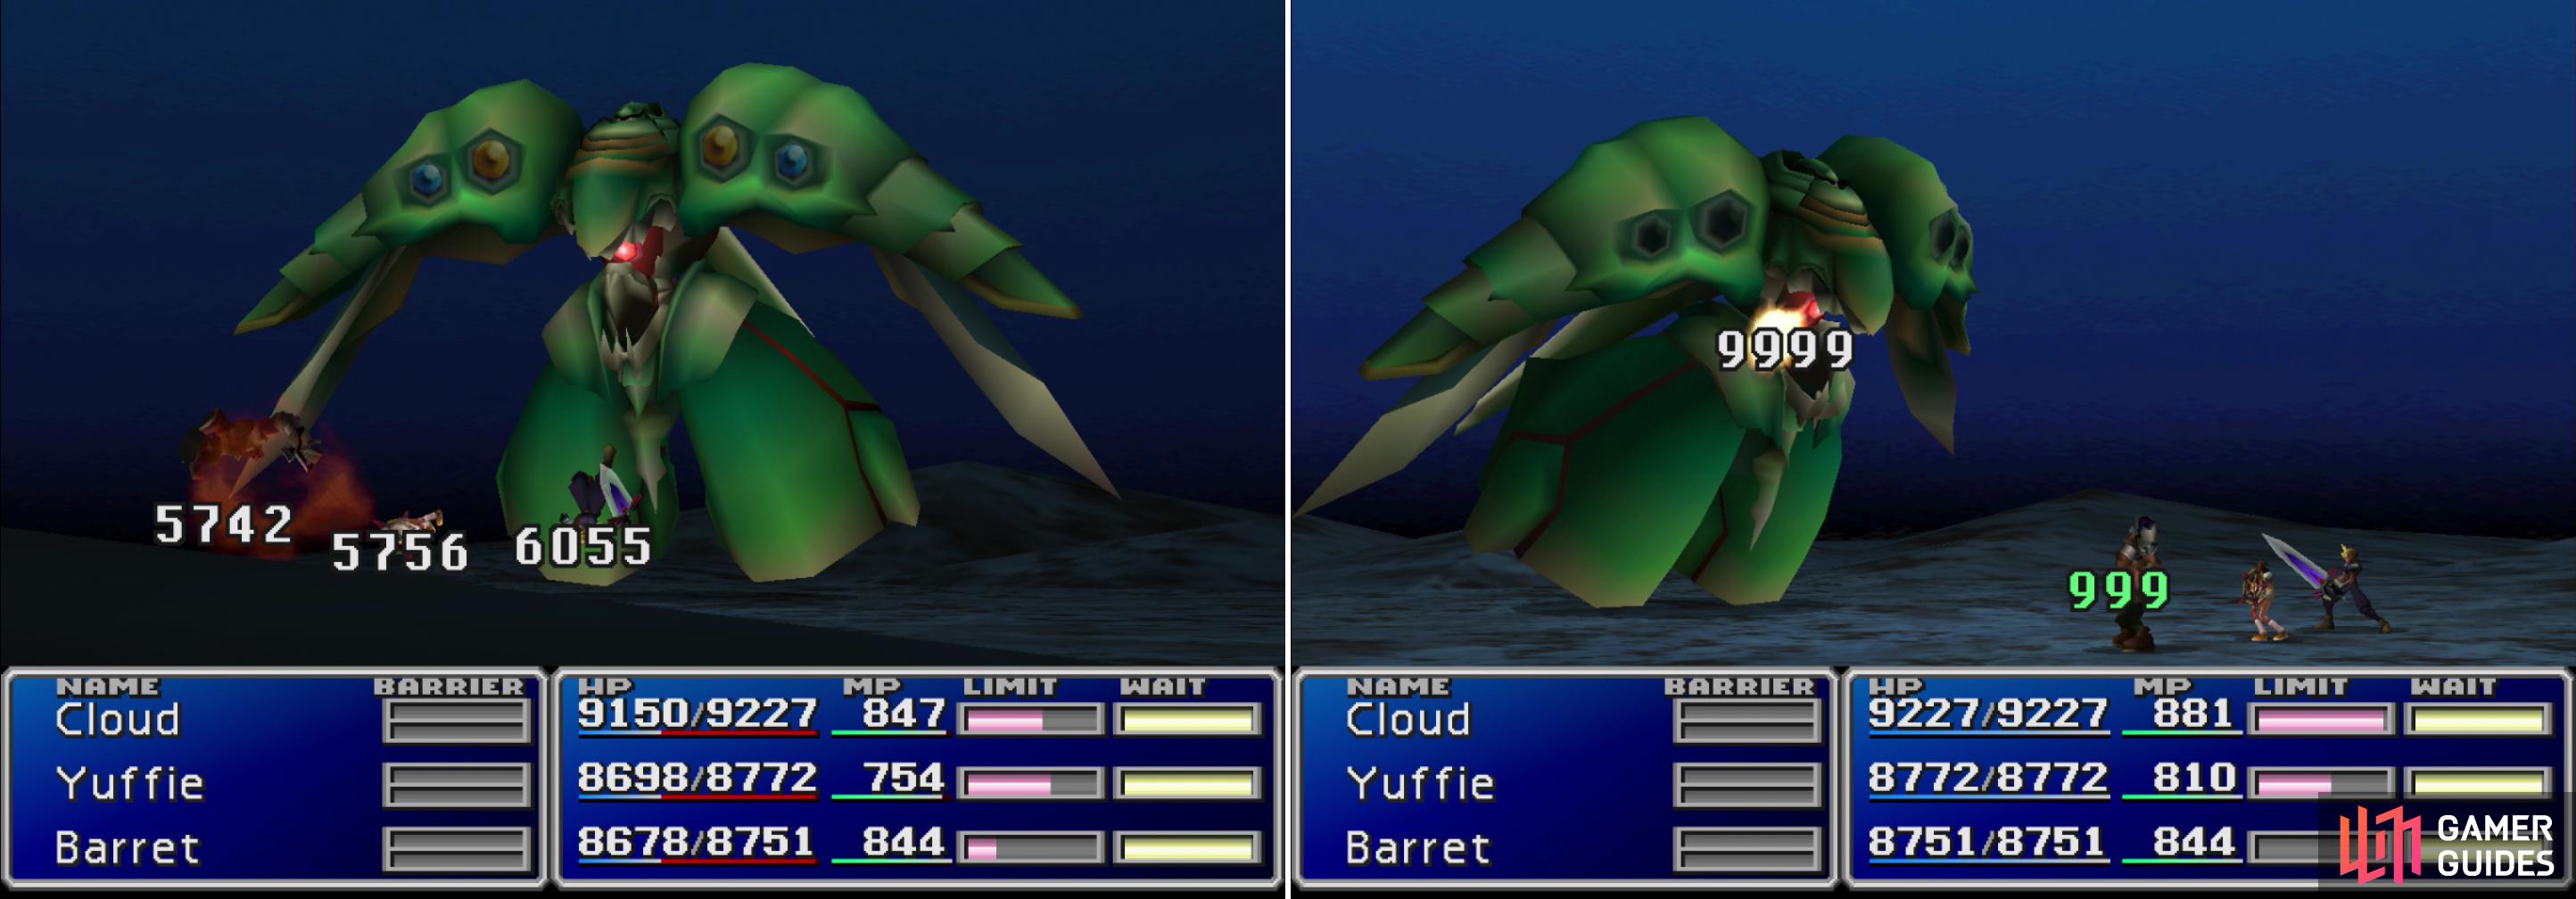 Emerald Weapon is on another level than Diamond and Ultimate Weapon were, expect to take thousands of damage from its basic attacks (left). Counter Materia, Mime Materia, Double Cut Materia and HP Absorb Materia can be combined to devastating effect (right).